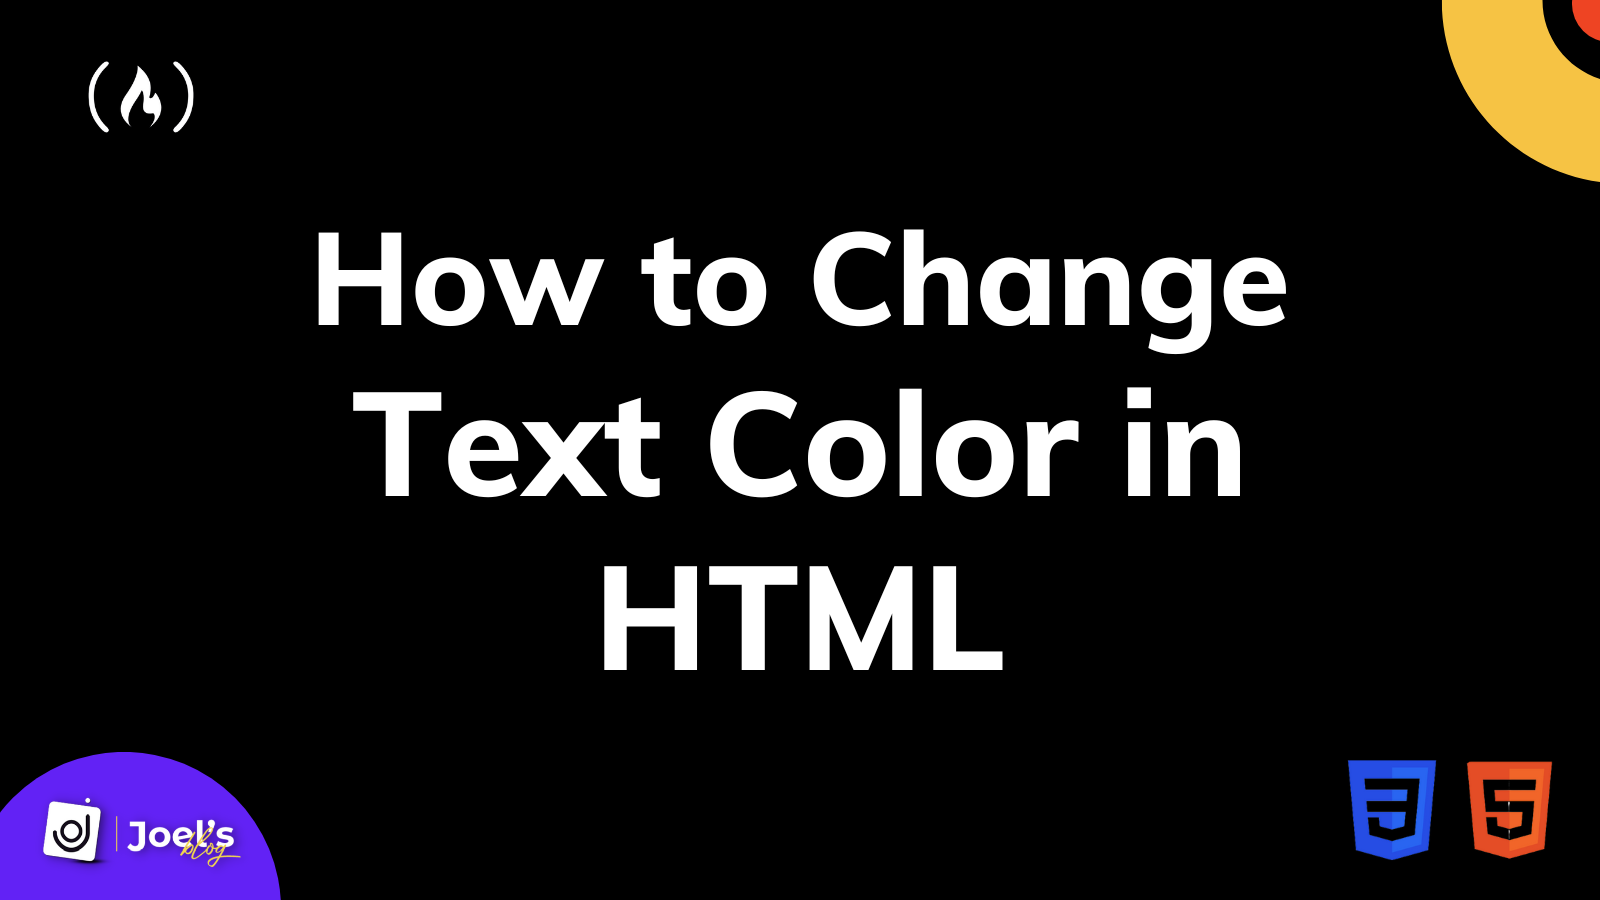 How to add font color in HTML using CSS?